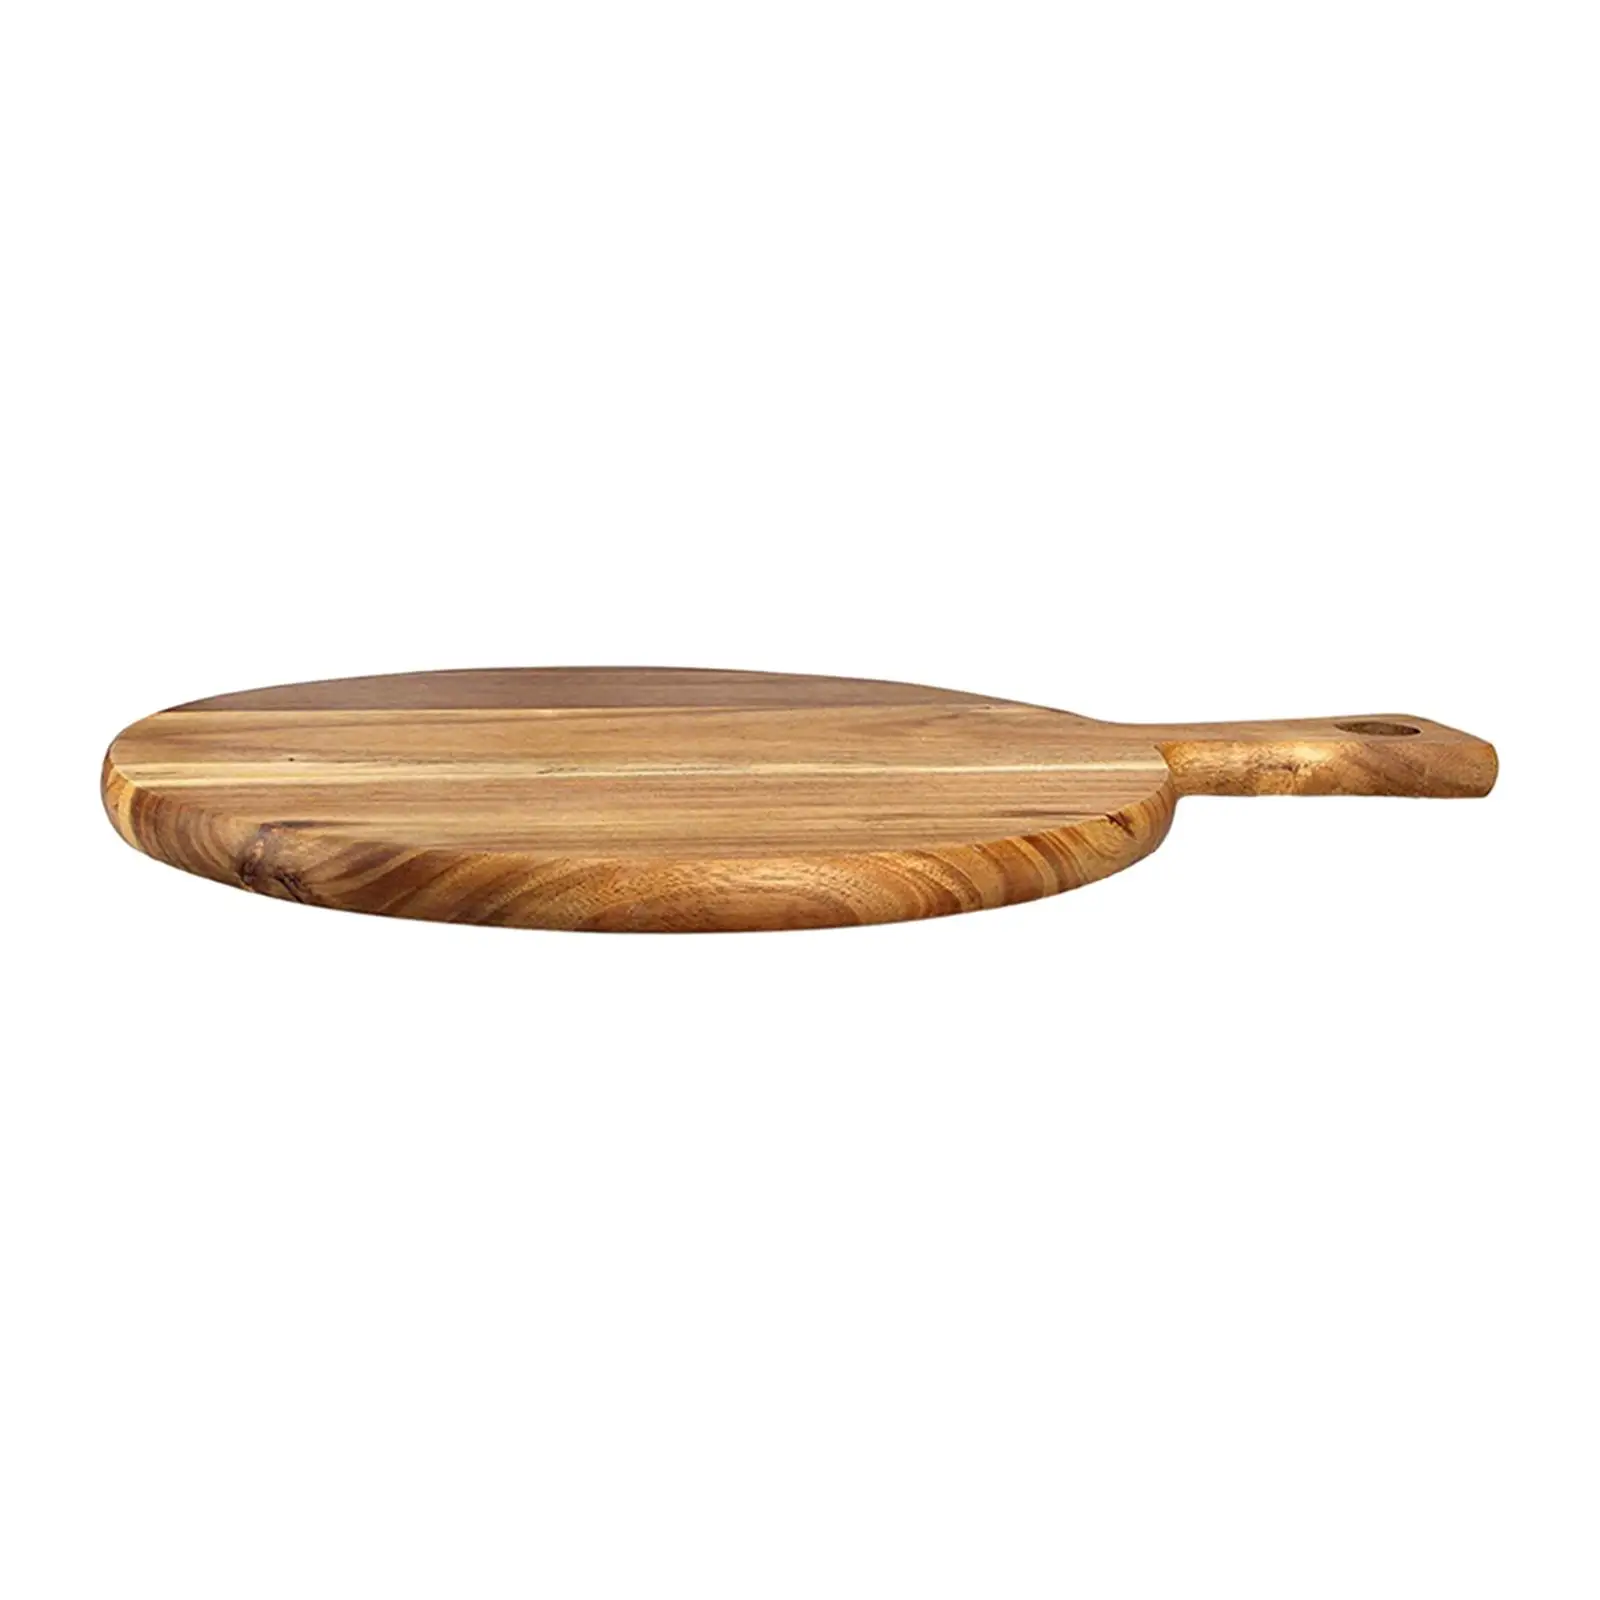 Wood Pizza Peel Vegetables Oven Accessories Lightweight for Cheese Bread Fruit Ergonomic Round Large Pizza Paddle Chopping Board